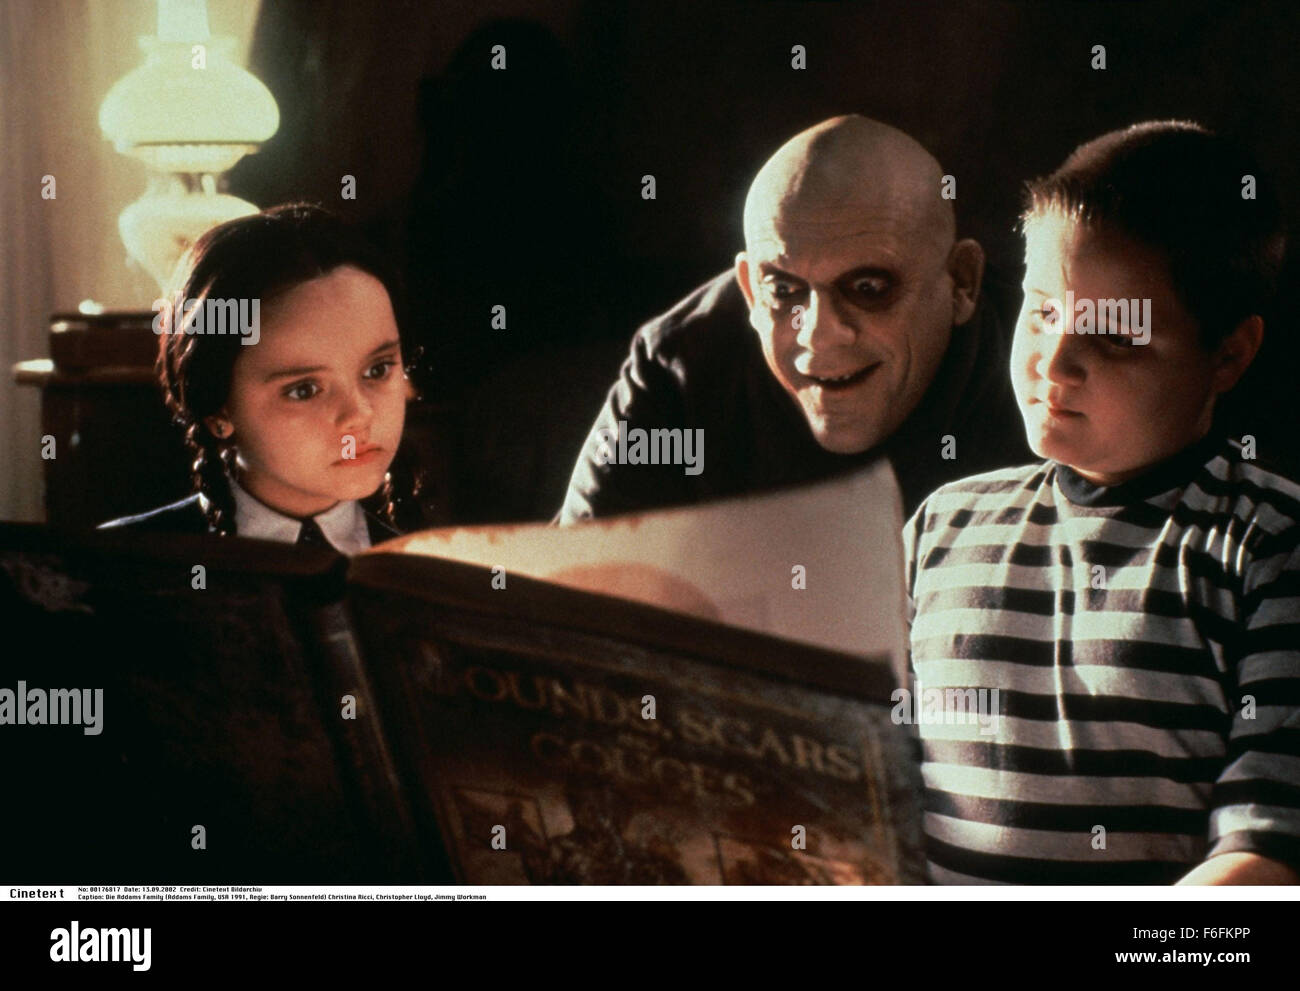 RELEASE DATE: 22 November 1991. MOVIE TITLE: The Addams Family - STUDIO: Paramount Pictures. PLOT: Con artists plan to fleece the eccentric family using an accomplice who claims to be their long lost Uncle Fester. PICTURED: CHRISTINA RICCI as Wednesday Addams with CHRISTOPHER LLOYD as Uncle Fester and JIMMY WORKMAN as Pugsley Addams. Stock Photo